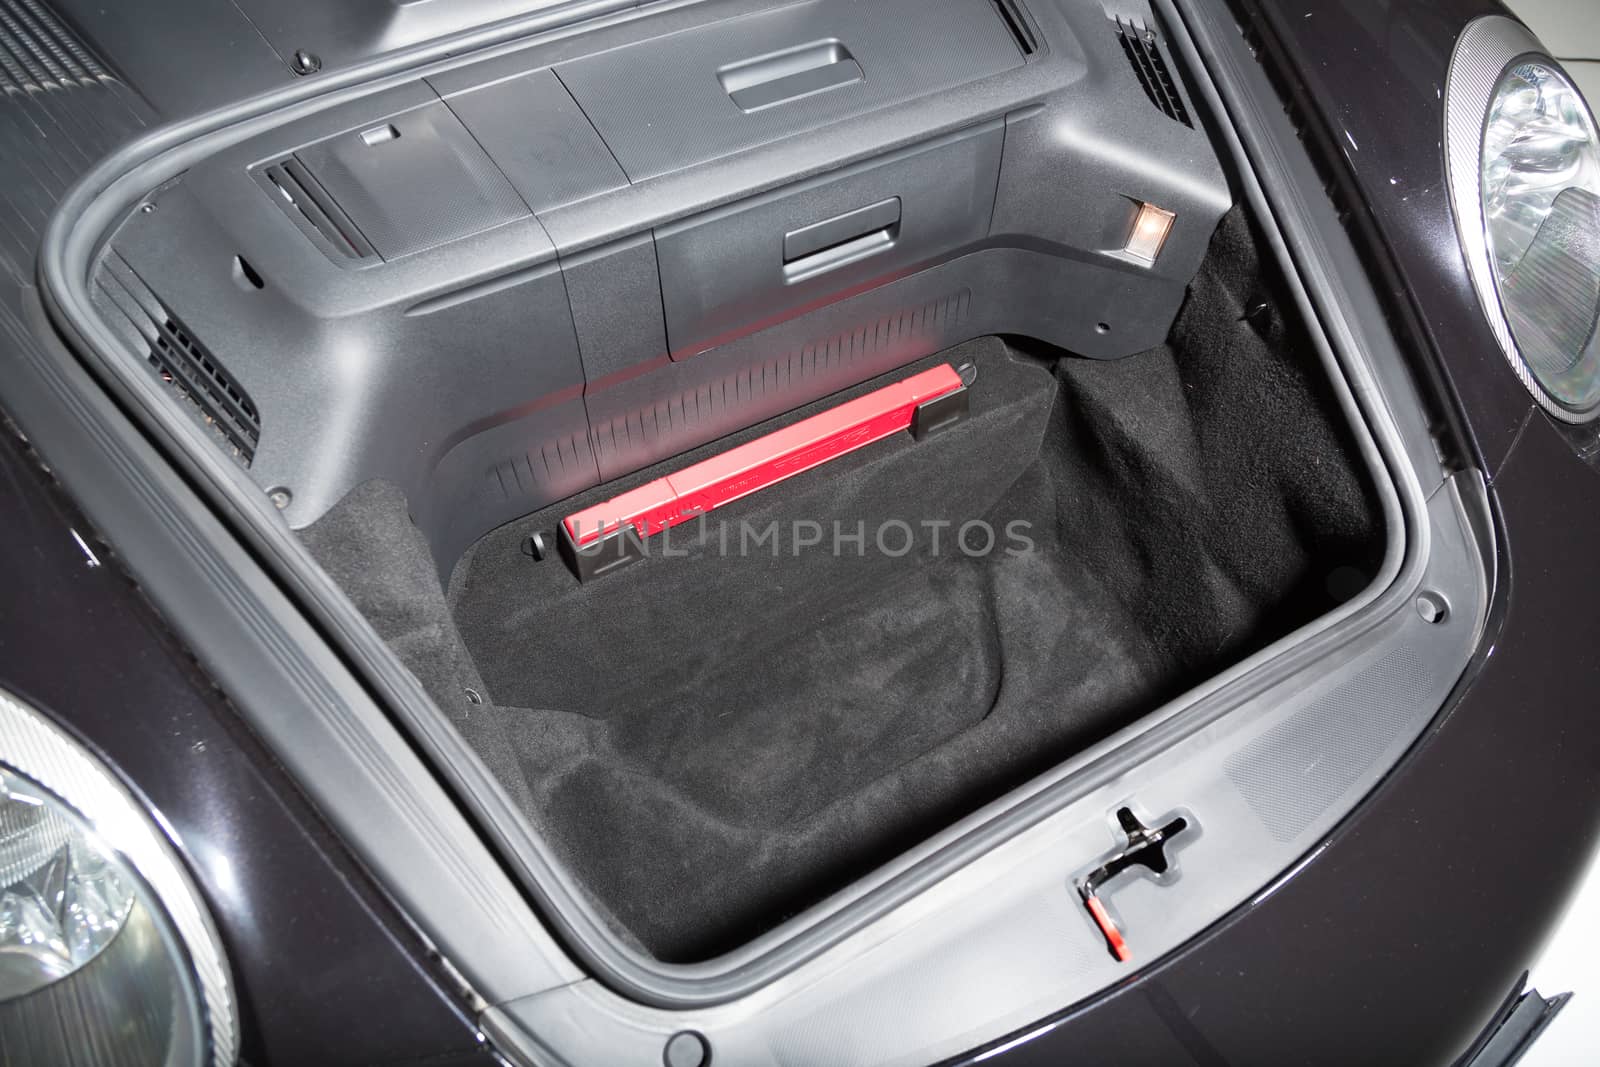 empty, space, open, trunk, boot, car, travel, luxury, transportation, hatchback, clean, design, suv, automobile, vehicle, back, isolated, concept, automotive, auto, small, nobody, transport, behind, black, sport, shiny, wheel, rack, park,